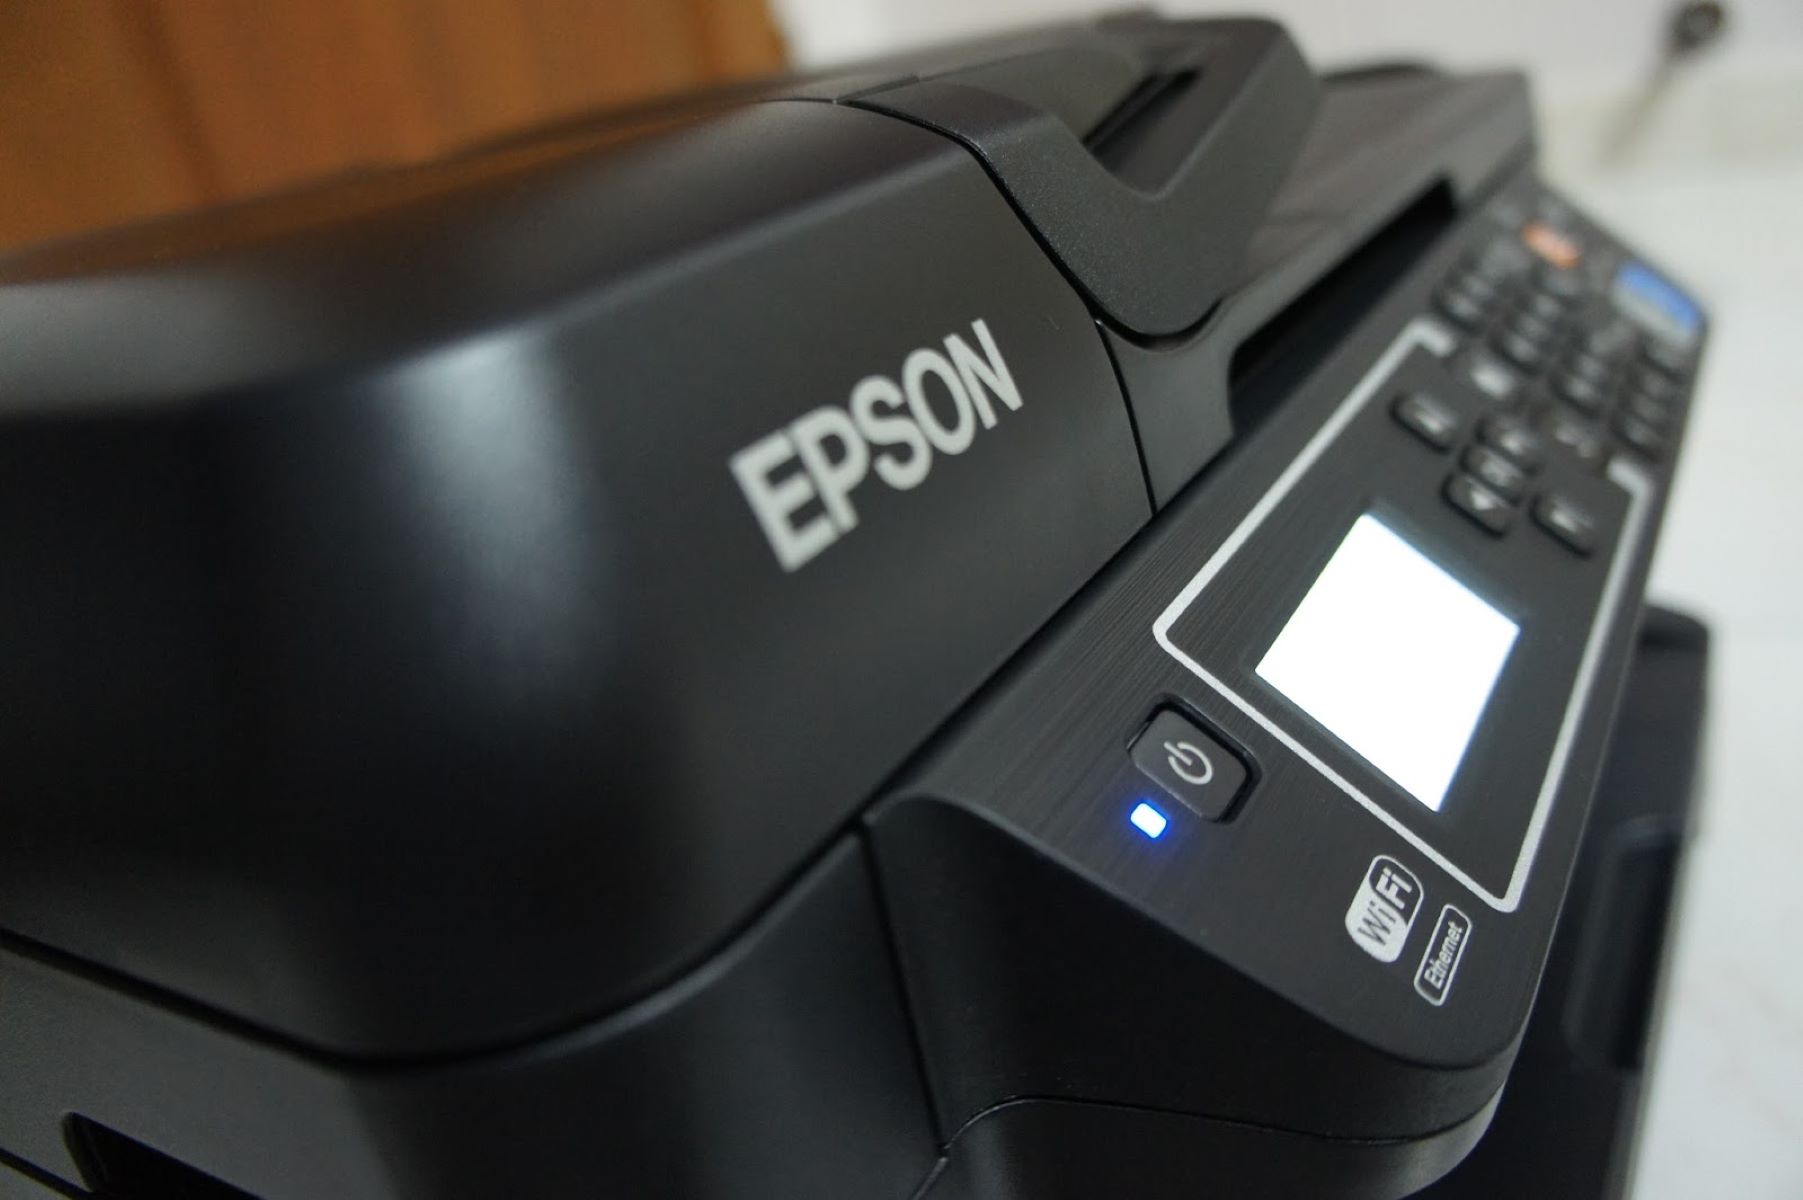 How To Print From Android Phone To Epson Printer Via USB